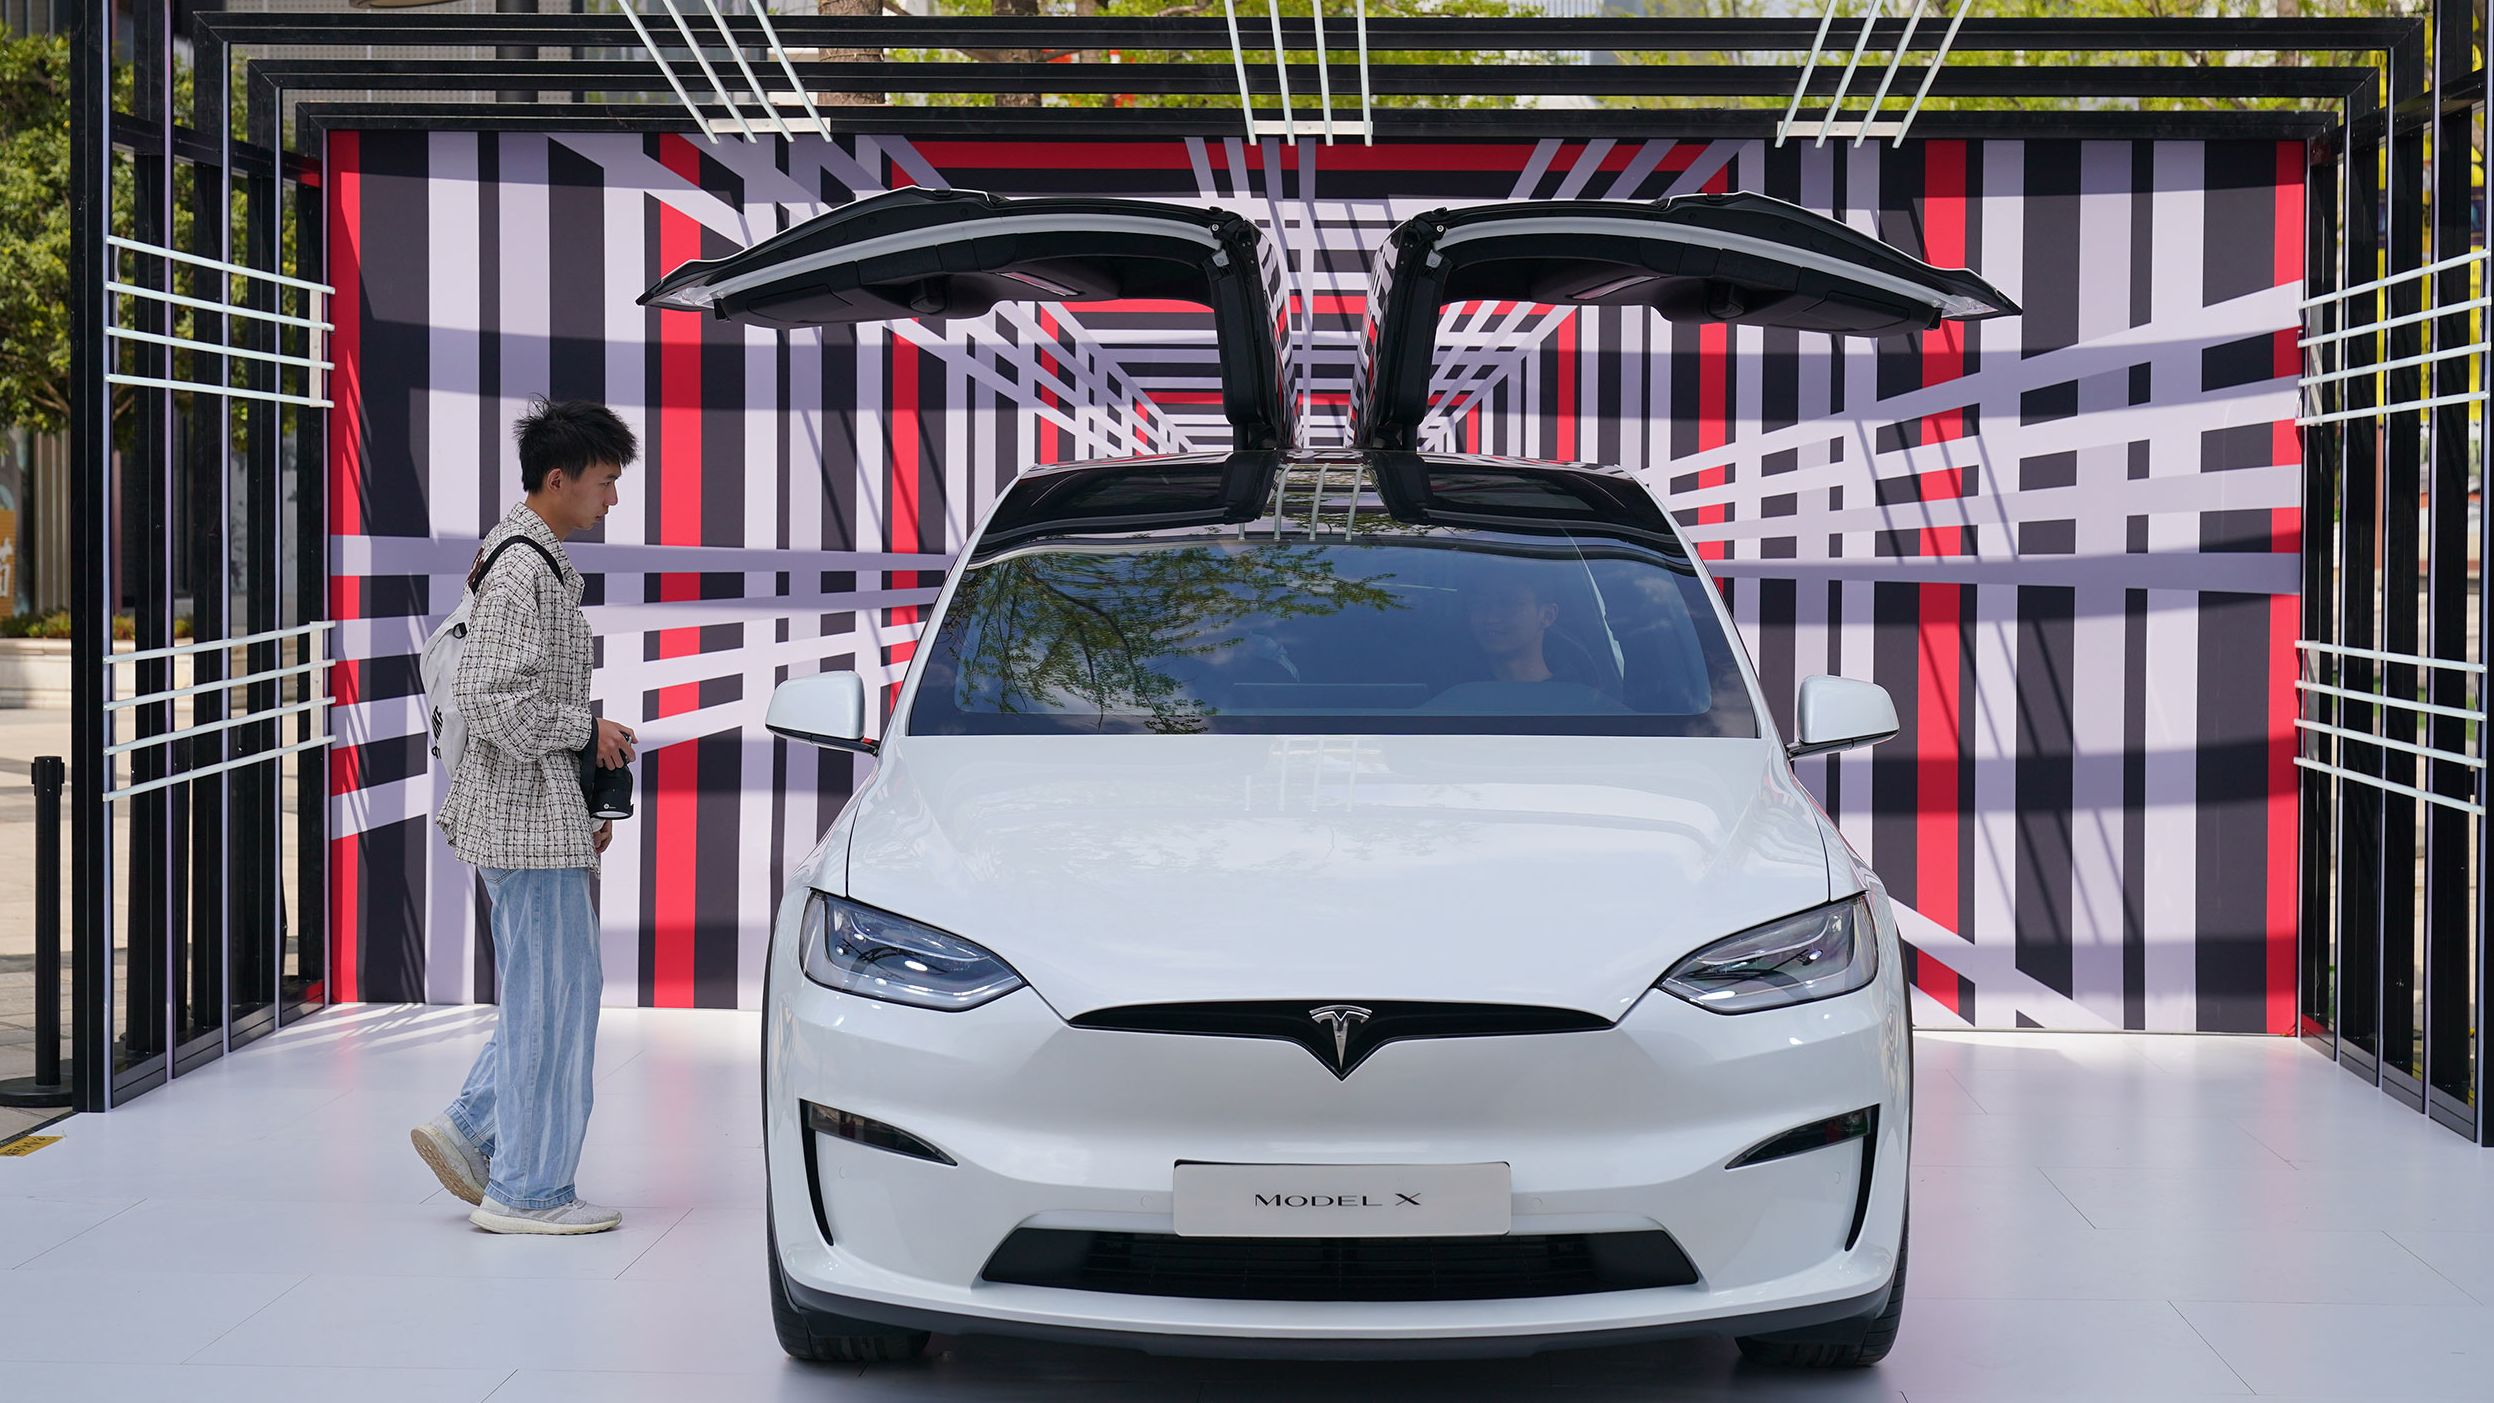 Why Tesla keeps the Model S and X even as sales dwindle | CNN Business